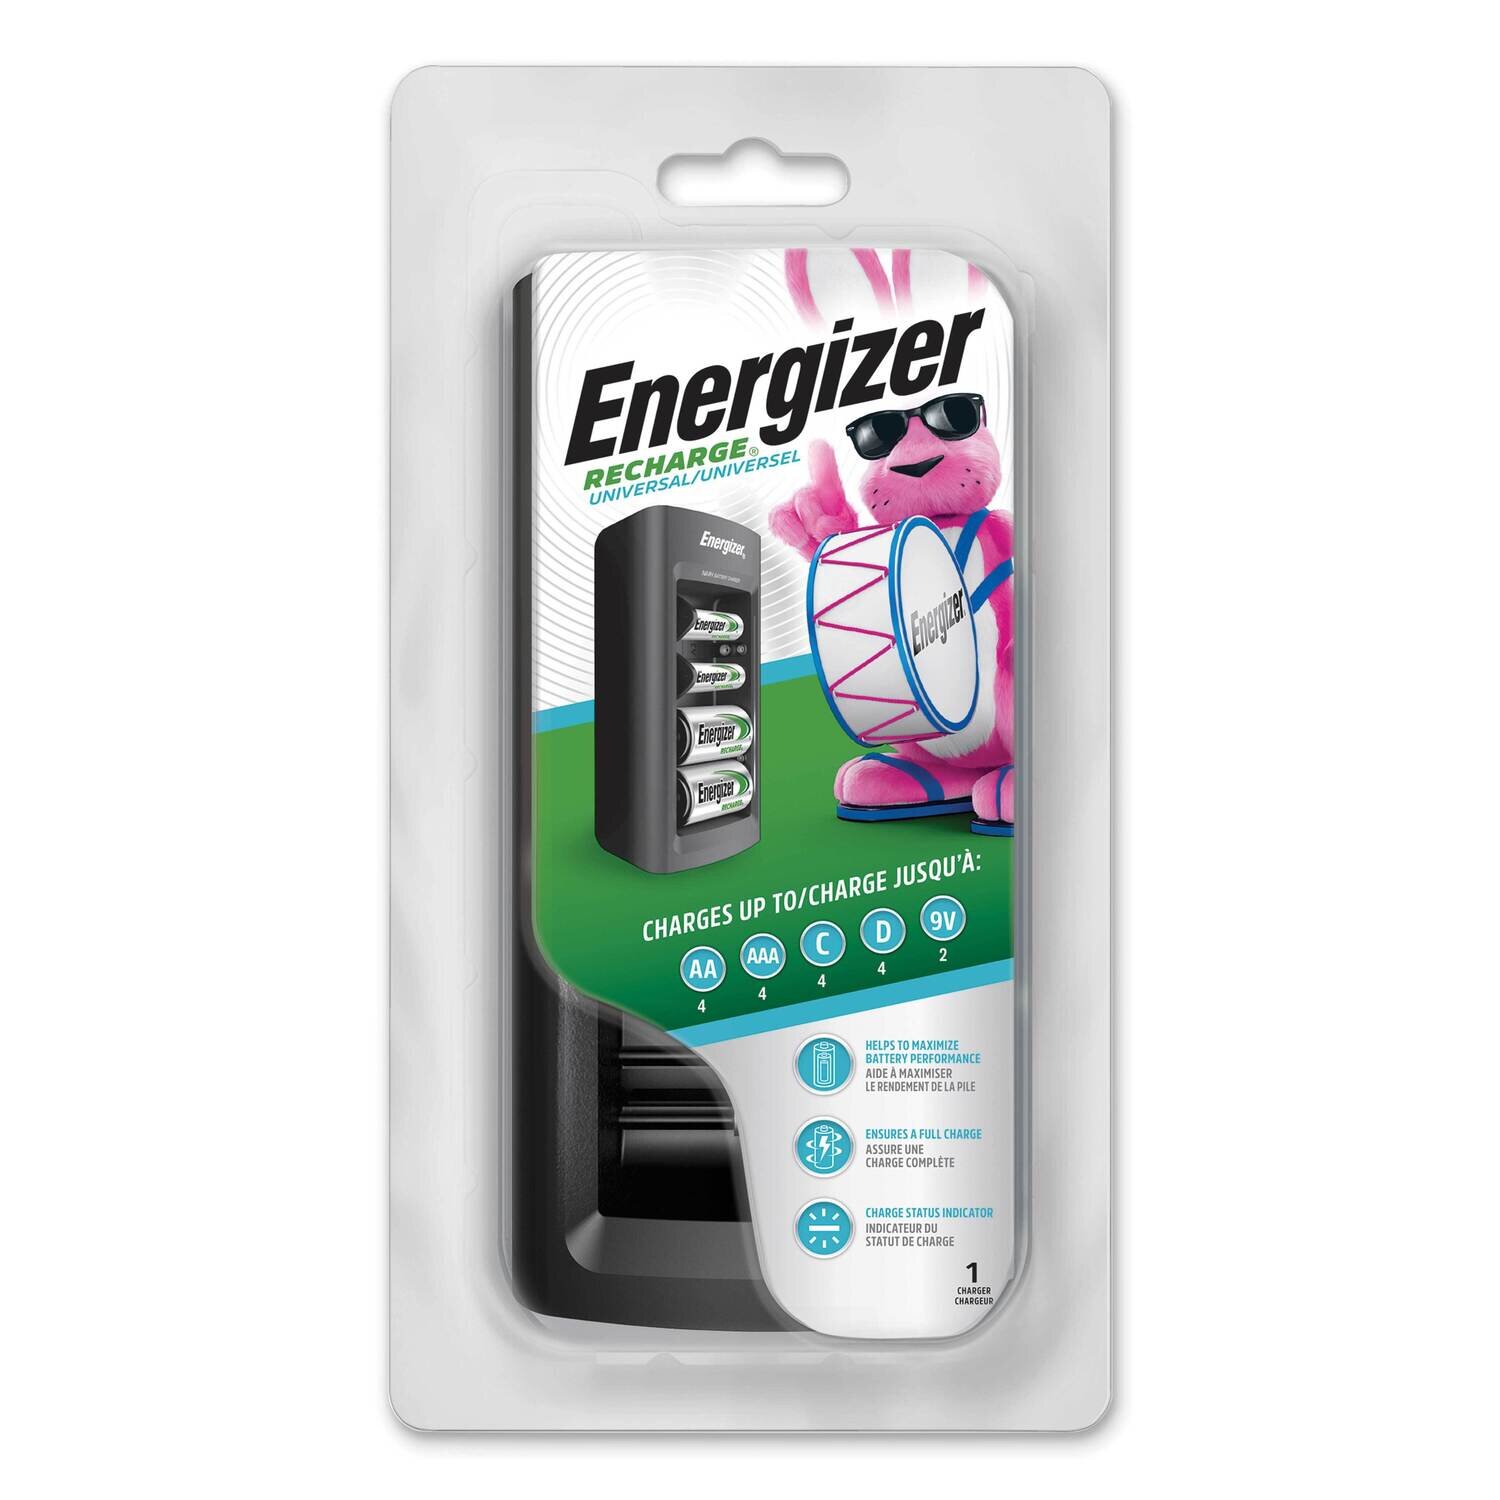 Energizer Recharge Universal Charger for Rechargeable AA AAA C D and 9V Batteries WBCHUN